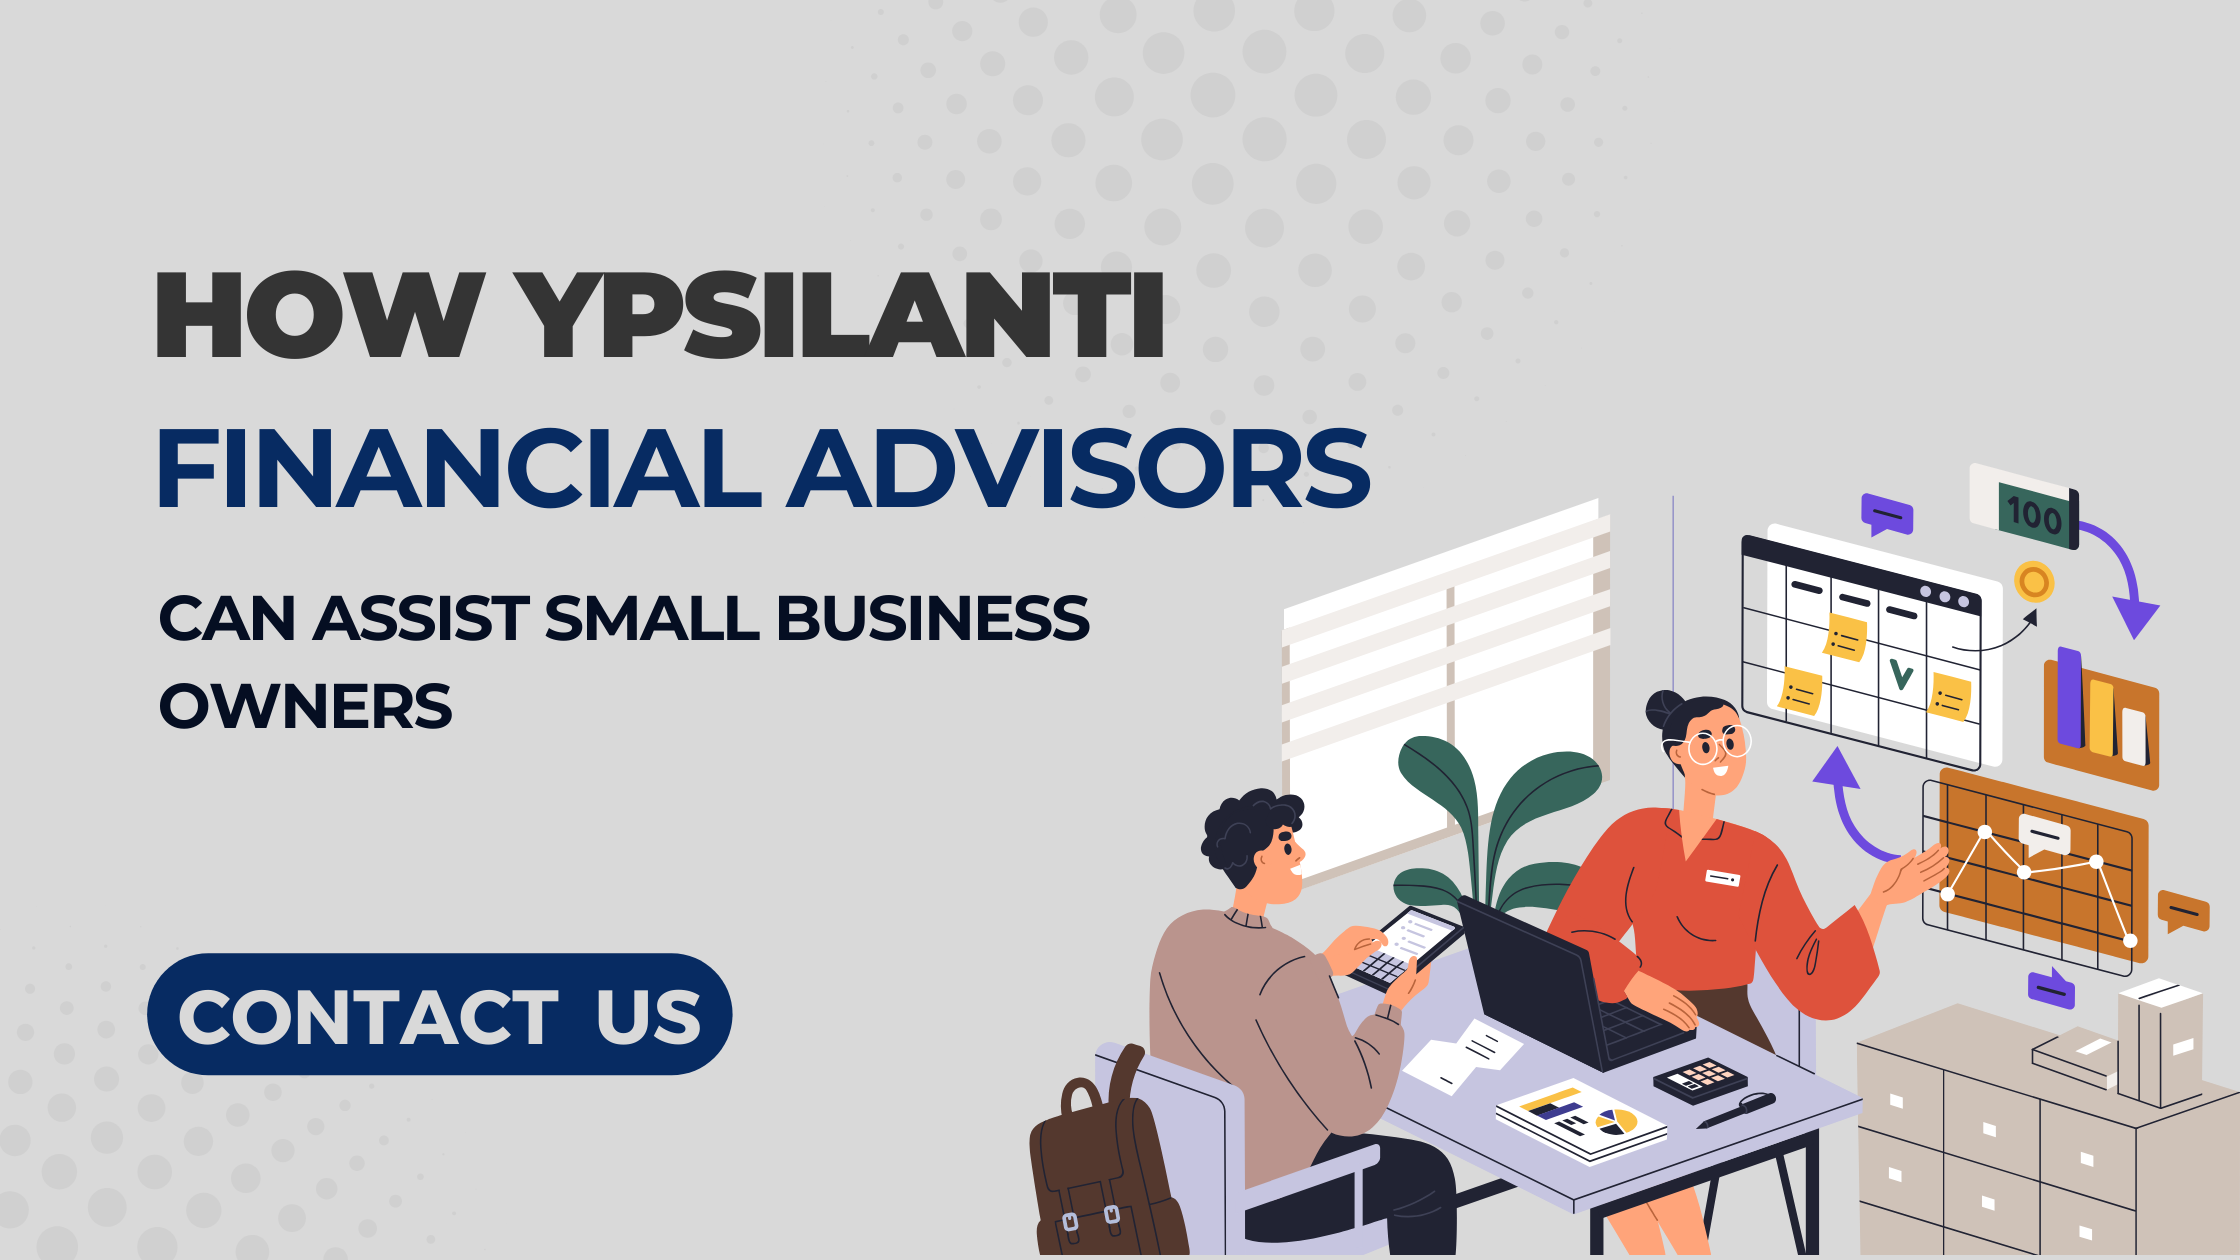 How Ypsilanti Financial Advisors Can Assist Small Business Owners | Articles Maker